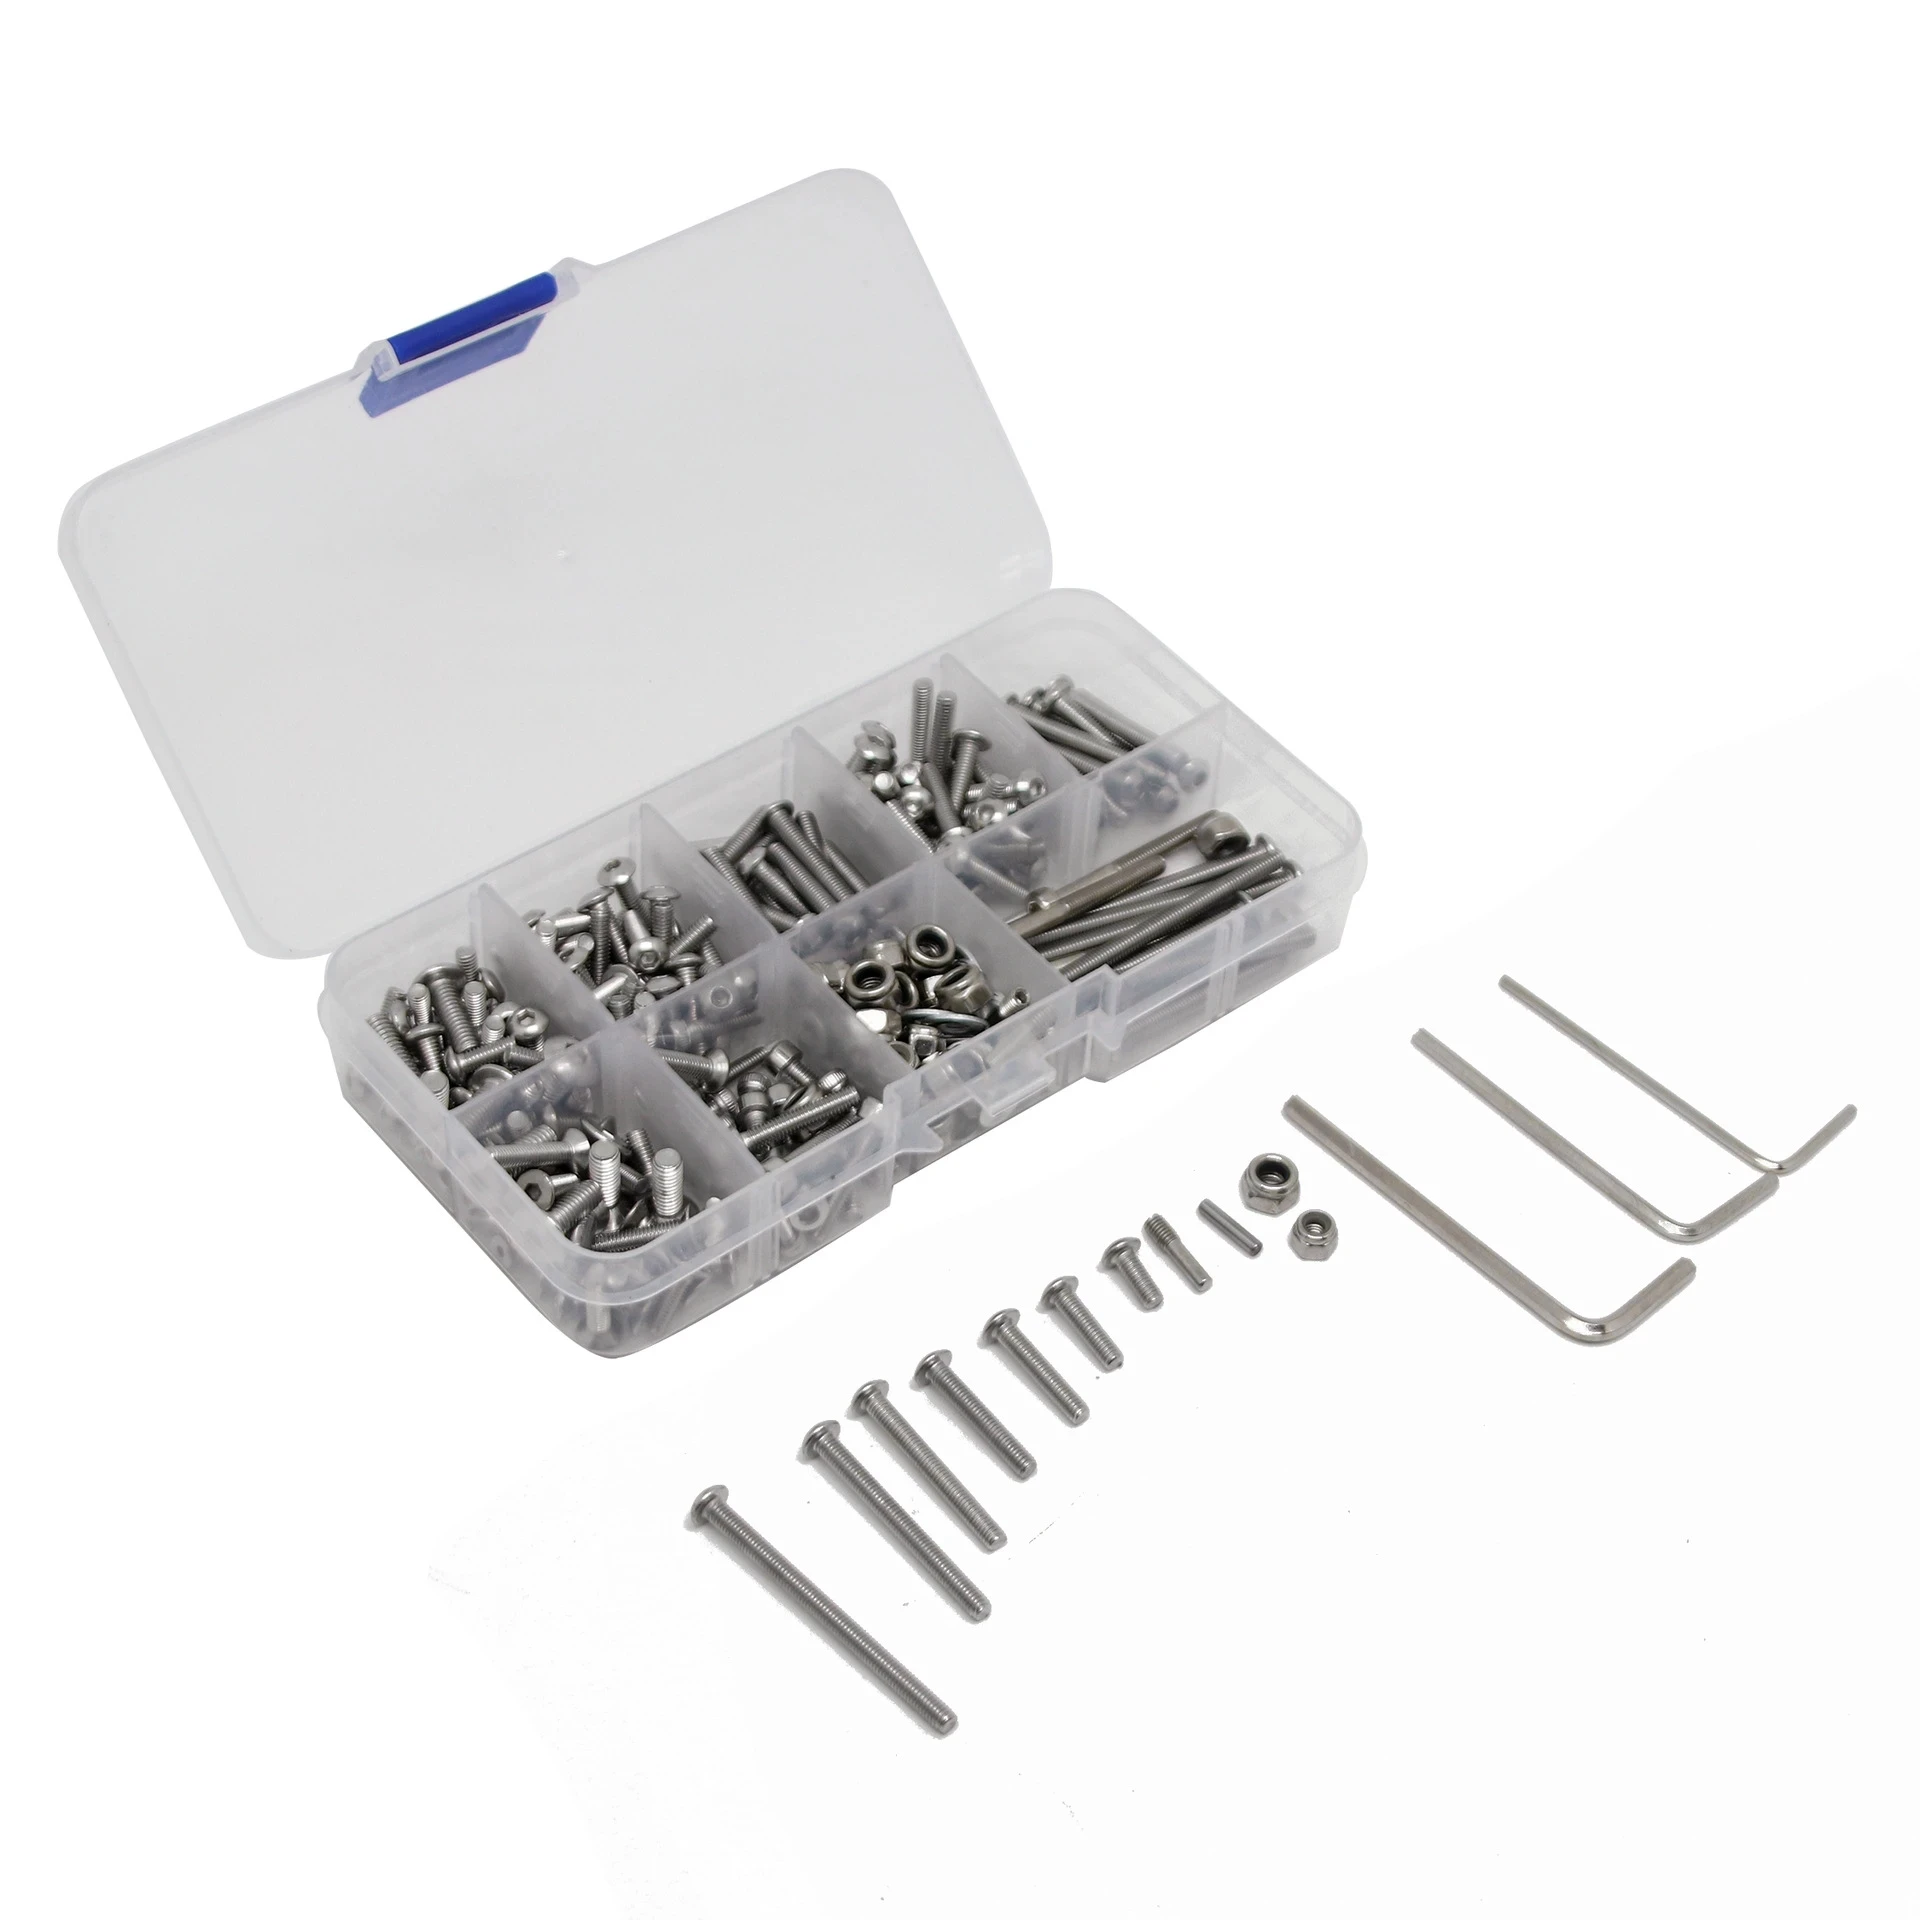 

RC Car Multiple specifications Screw box Stainless Steel Screw Kit Set for 1/10 Traxxas Slash 2WD RTR / Pro Repair Accessories